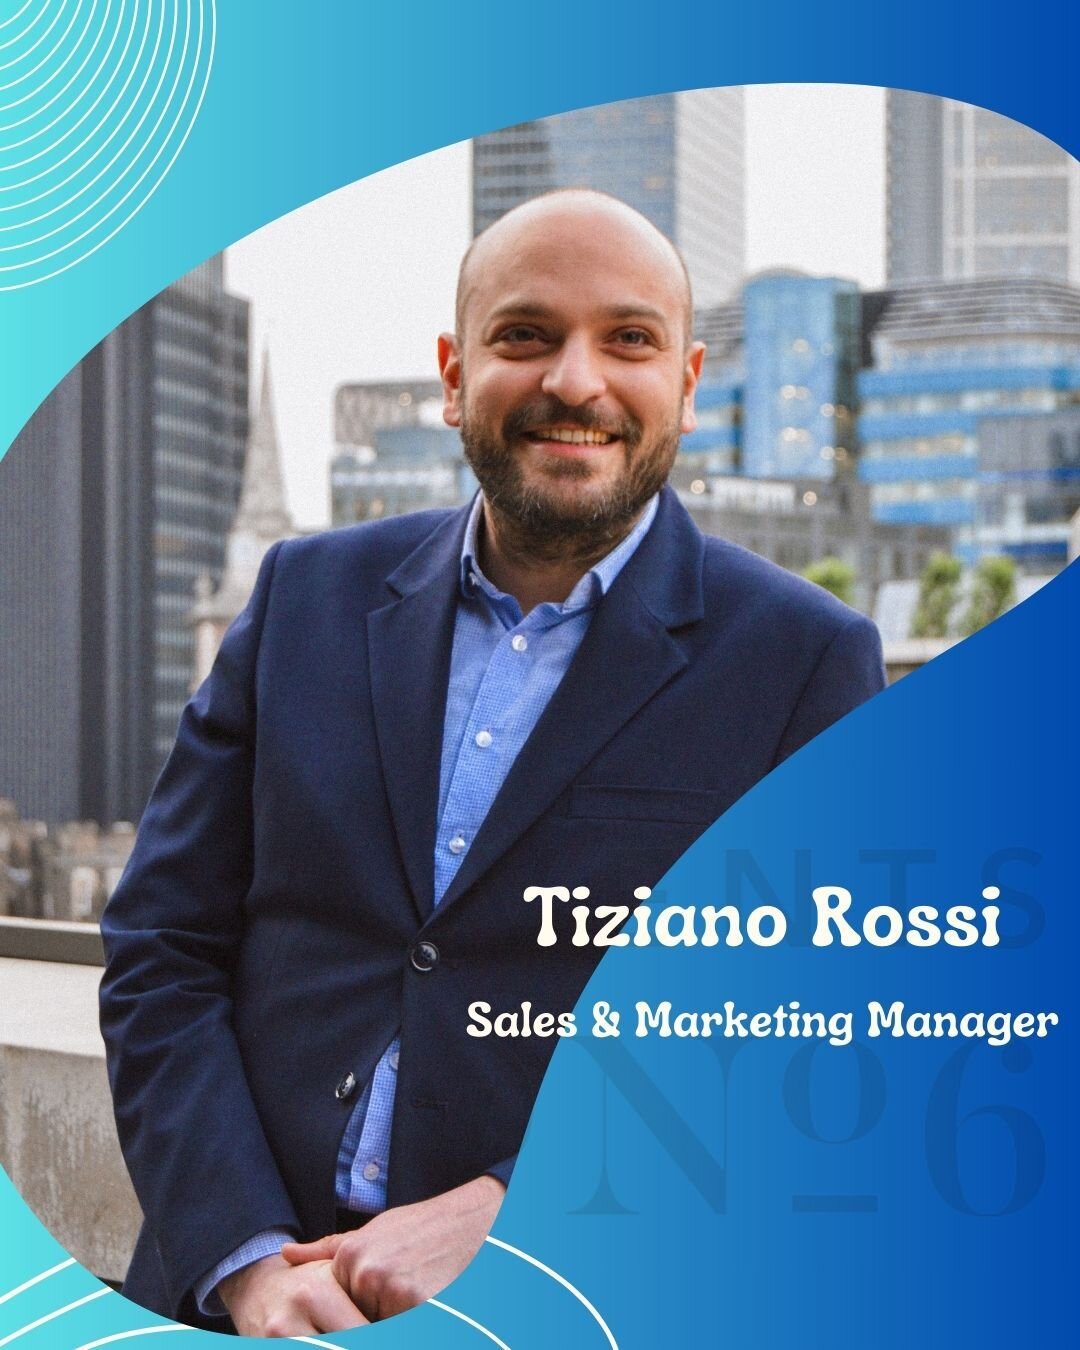 Meet Tiziano!!

Q: When did you join the company?
- I joined Events @ No 6 as the Sales and Marketing Assistant Manager just after the pandemic, in September 2021. 
It's been great to see events coming back to the level we were used to in 2019 and my